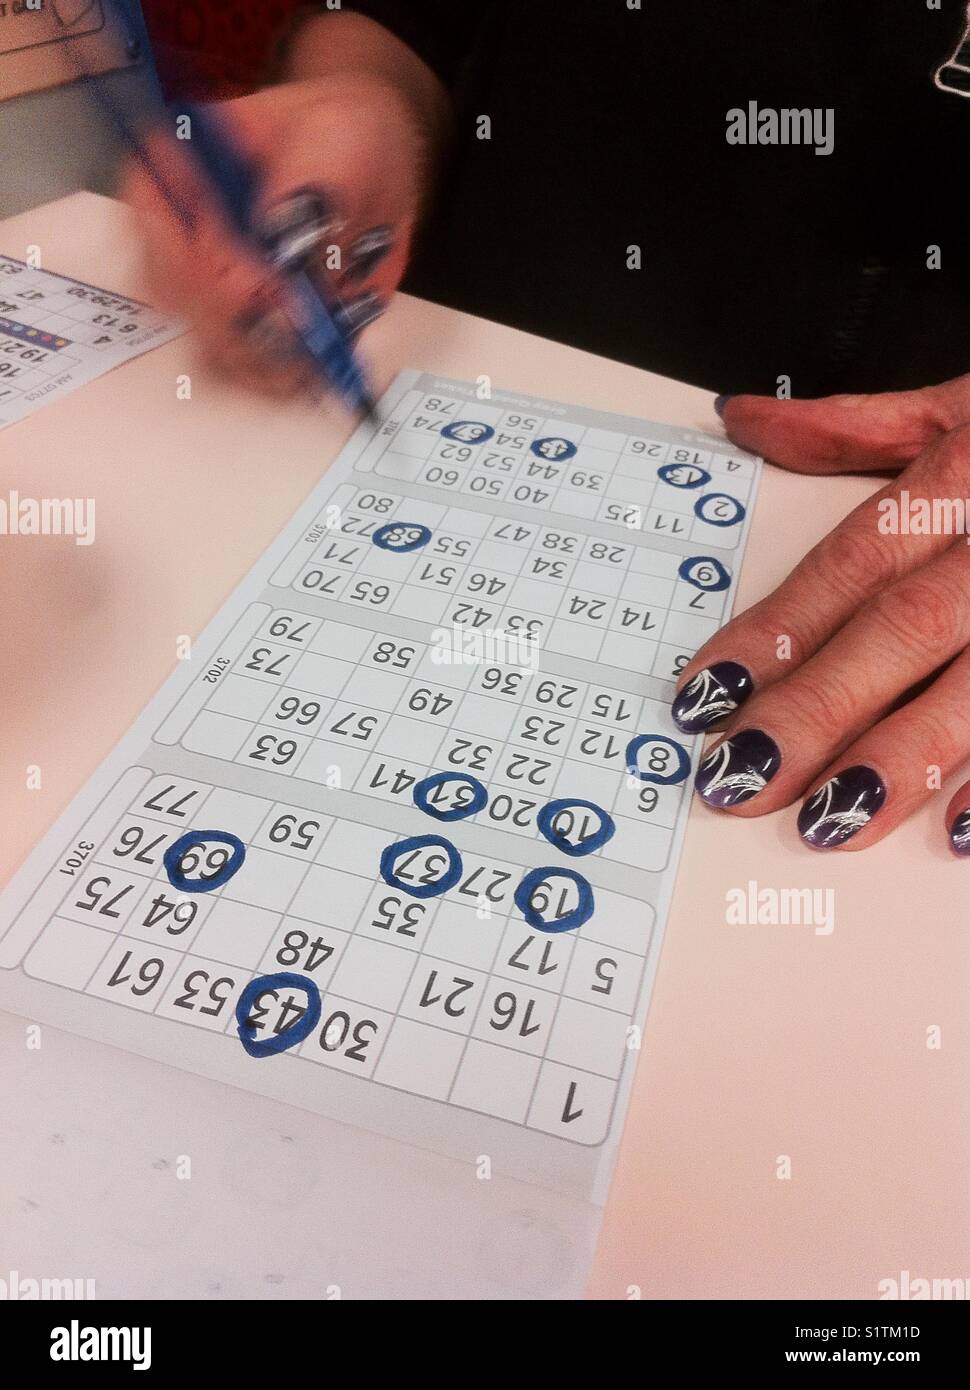 Lady with painted nails, playing bingo. Stock Photo